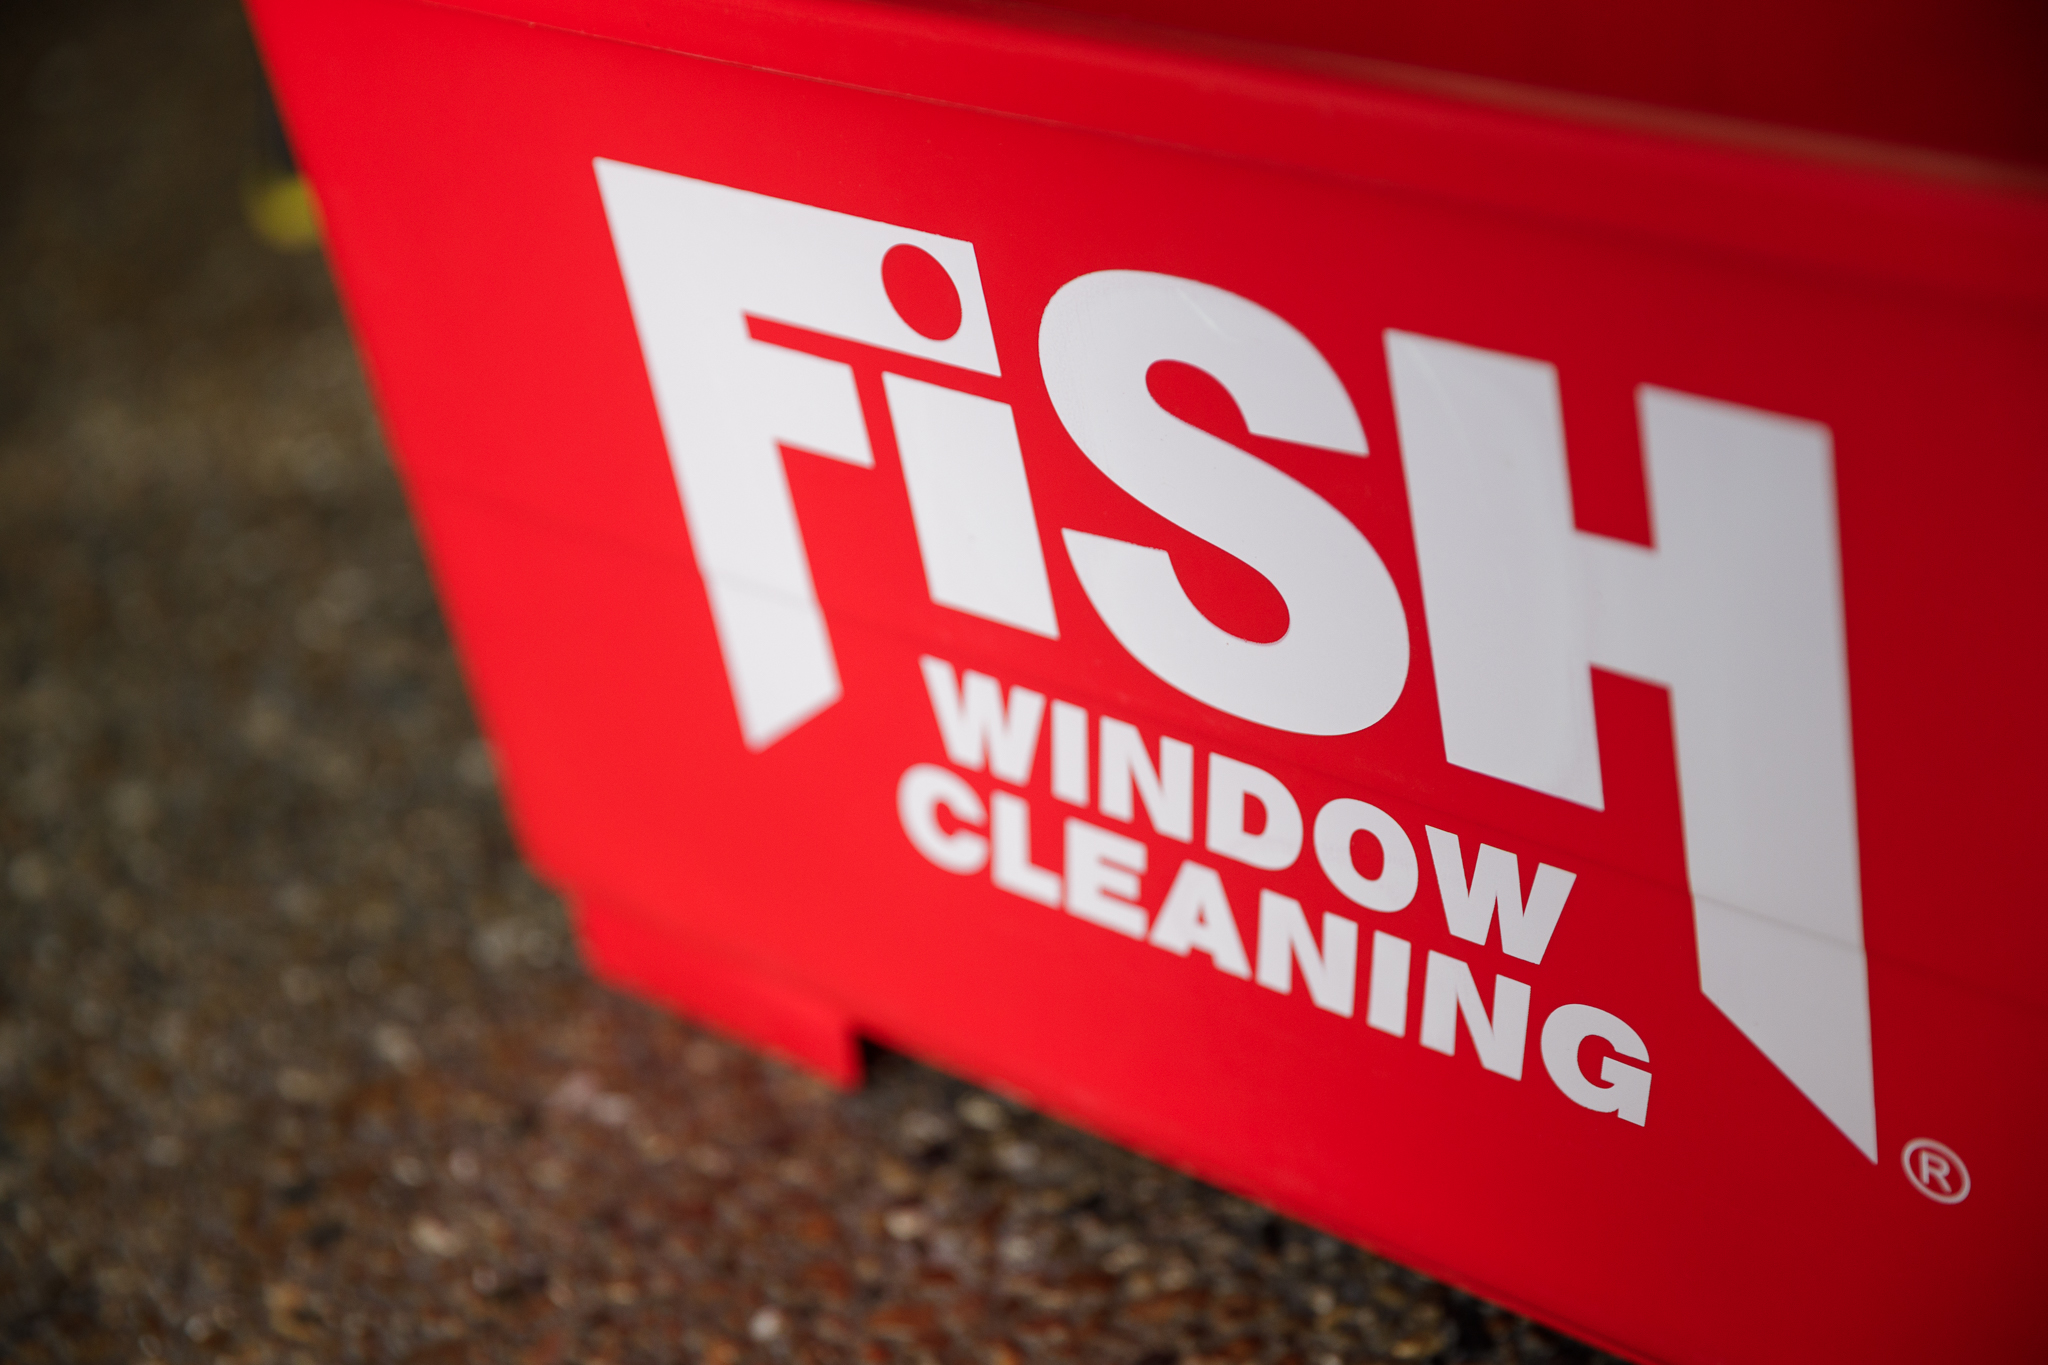 Fairfield County Window Washing Services